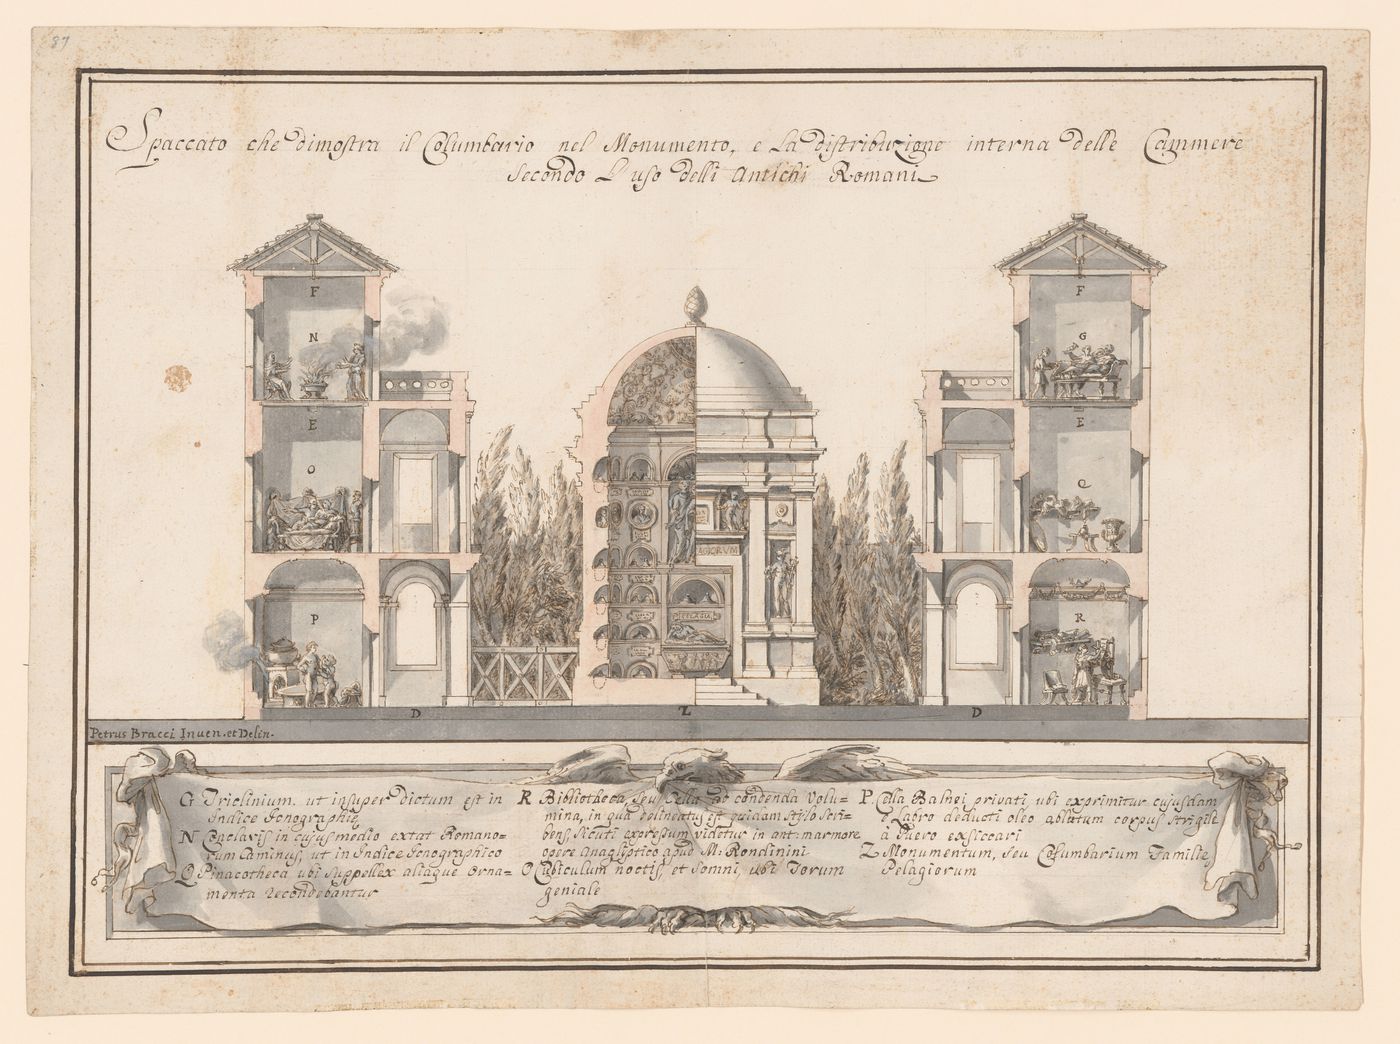 Section for the reconstruction of the Pelagia family mausoleum